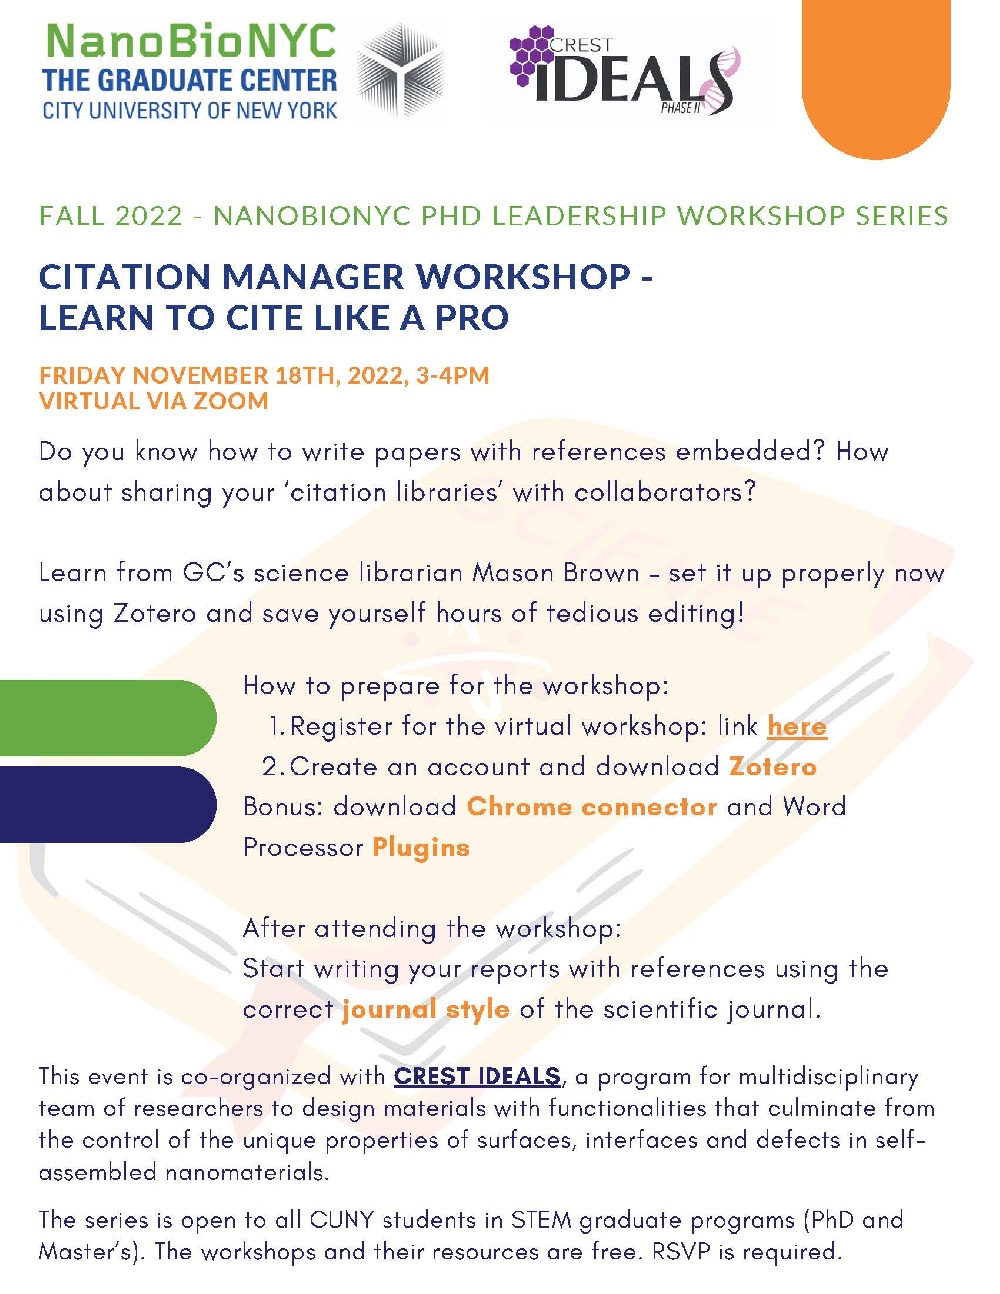 Using Zotero workshop - Learn to cite like a pro!